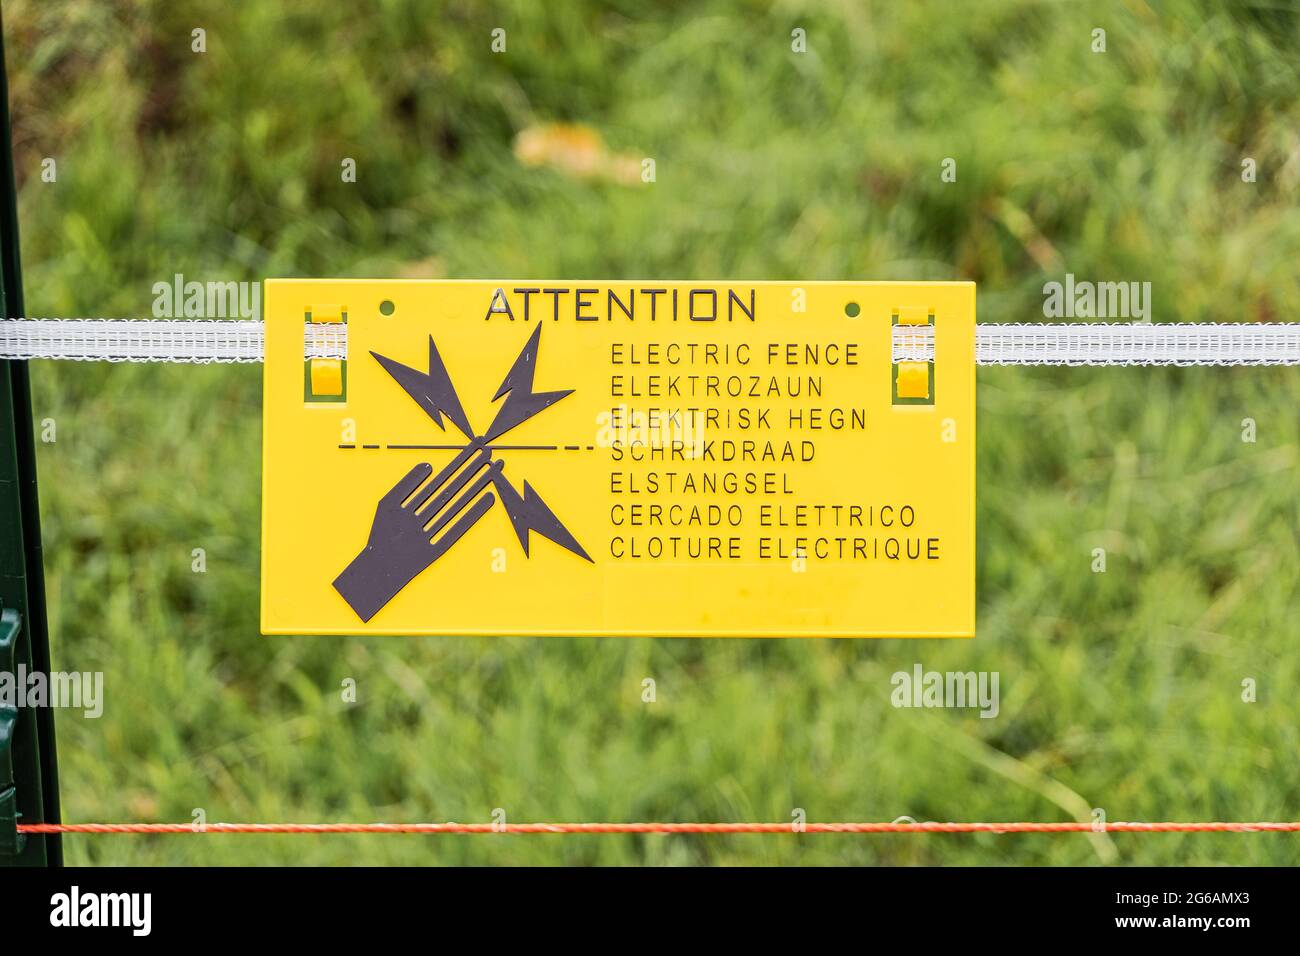 An electric fence warning sign in multiple languages Stock Photo